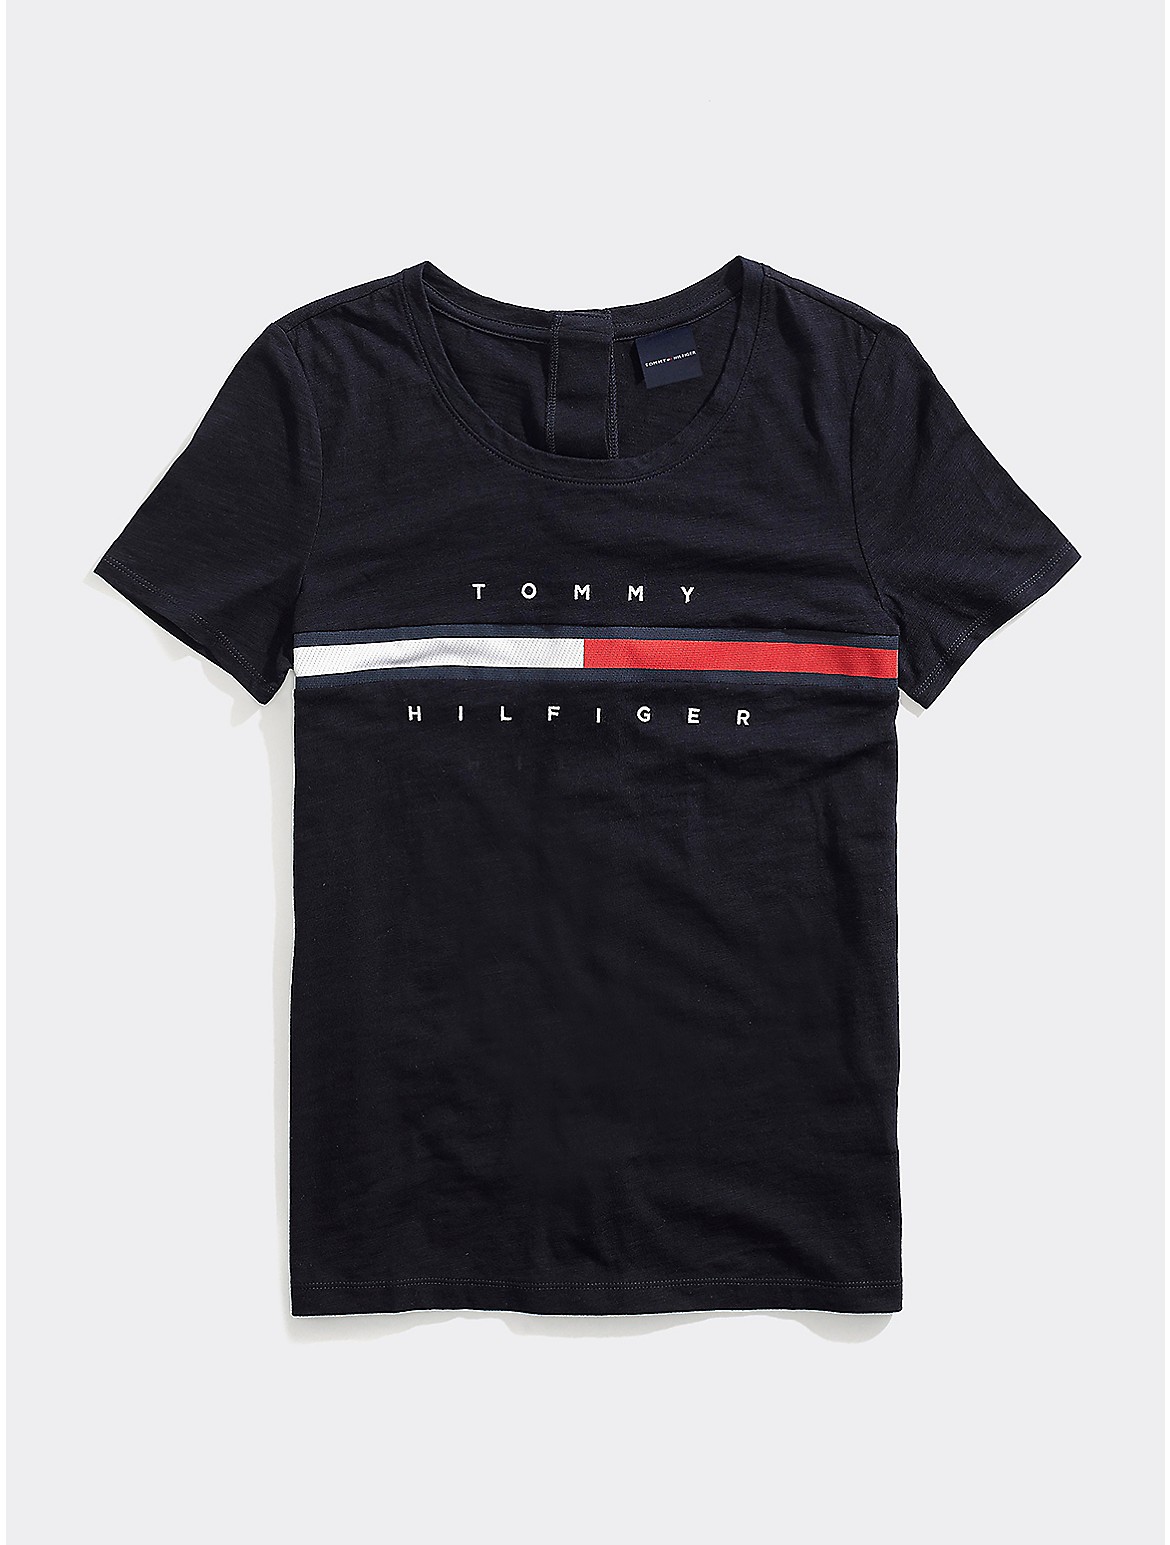 Tommy Hilfiger Women's Seated Fit Stripe Signature T-Shirt